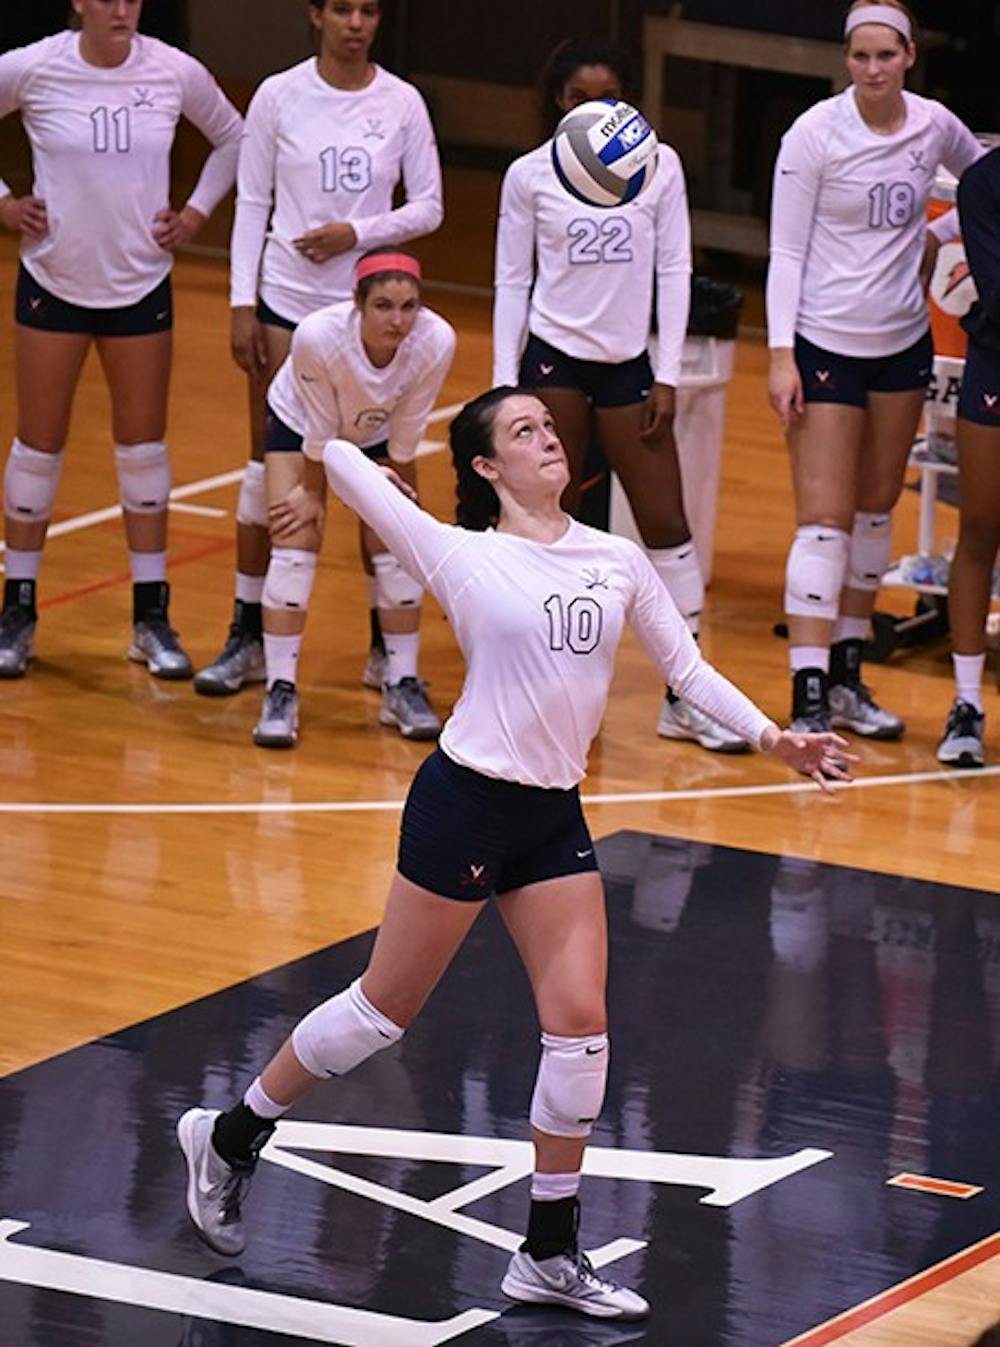 Freshman middle hitter Anna Walsh paced Virginia with 14 kills in a win against the Wolfpack.